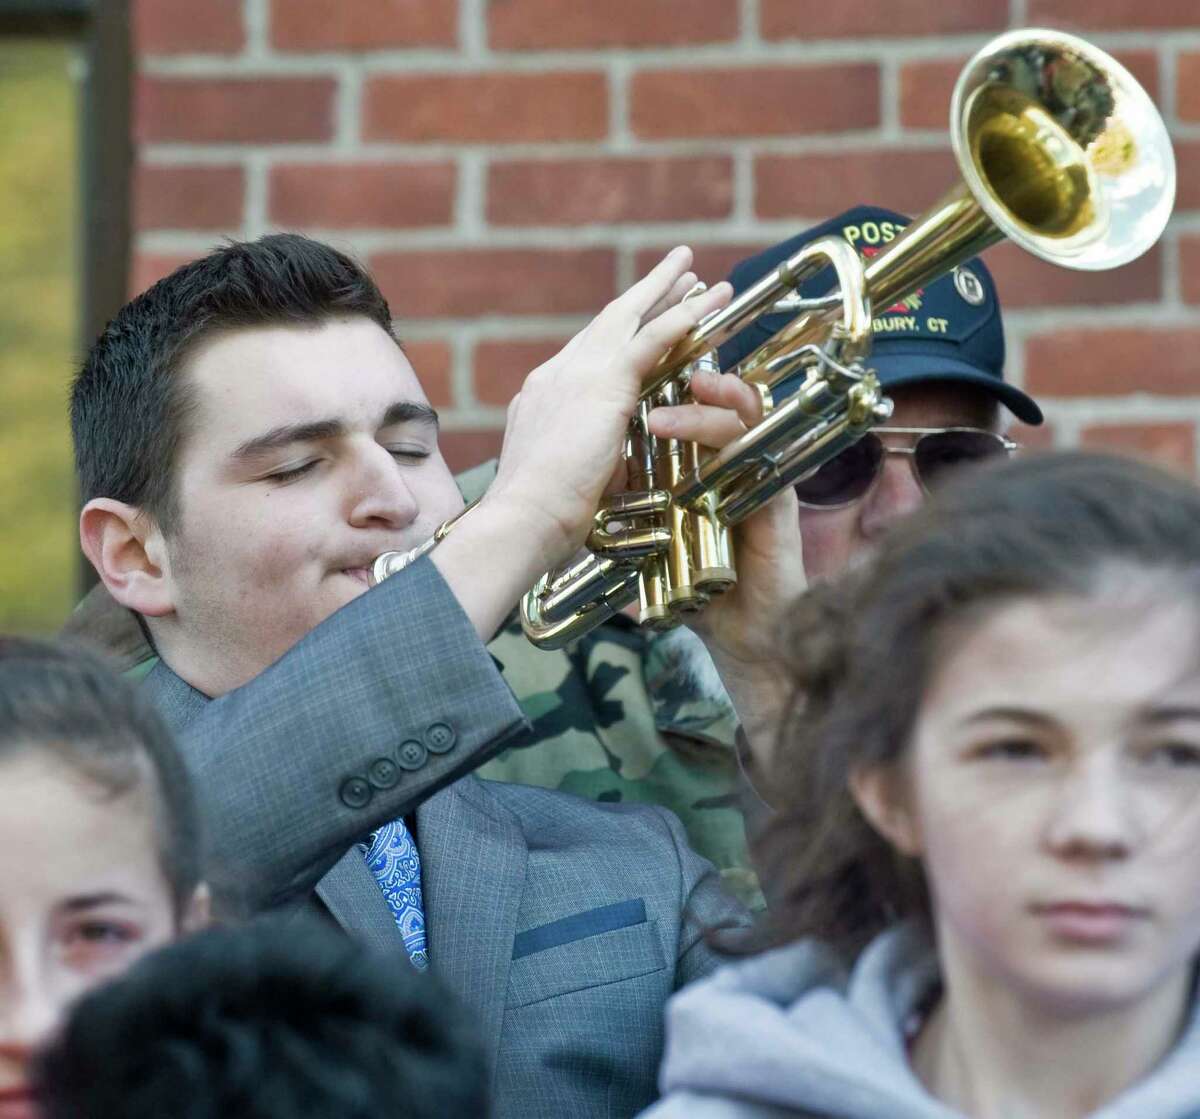 Maxwell Durkin of Danbury plays Taps during the Veteran's Day Ceremony in front of the War Memorial Building at Rogers Park in Danbury. Friday, Nov. 11, 2016